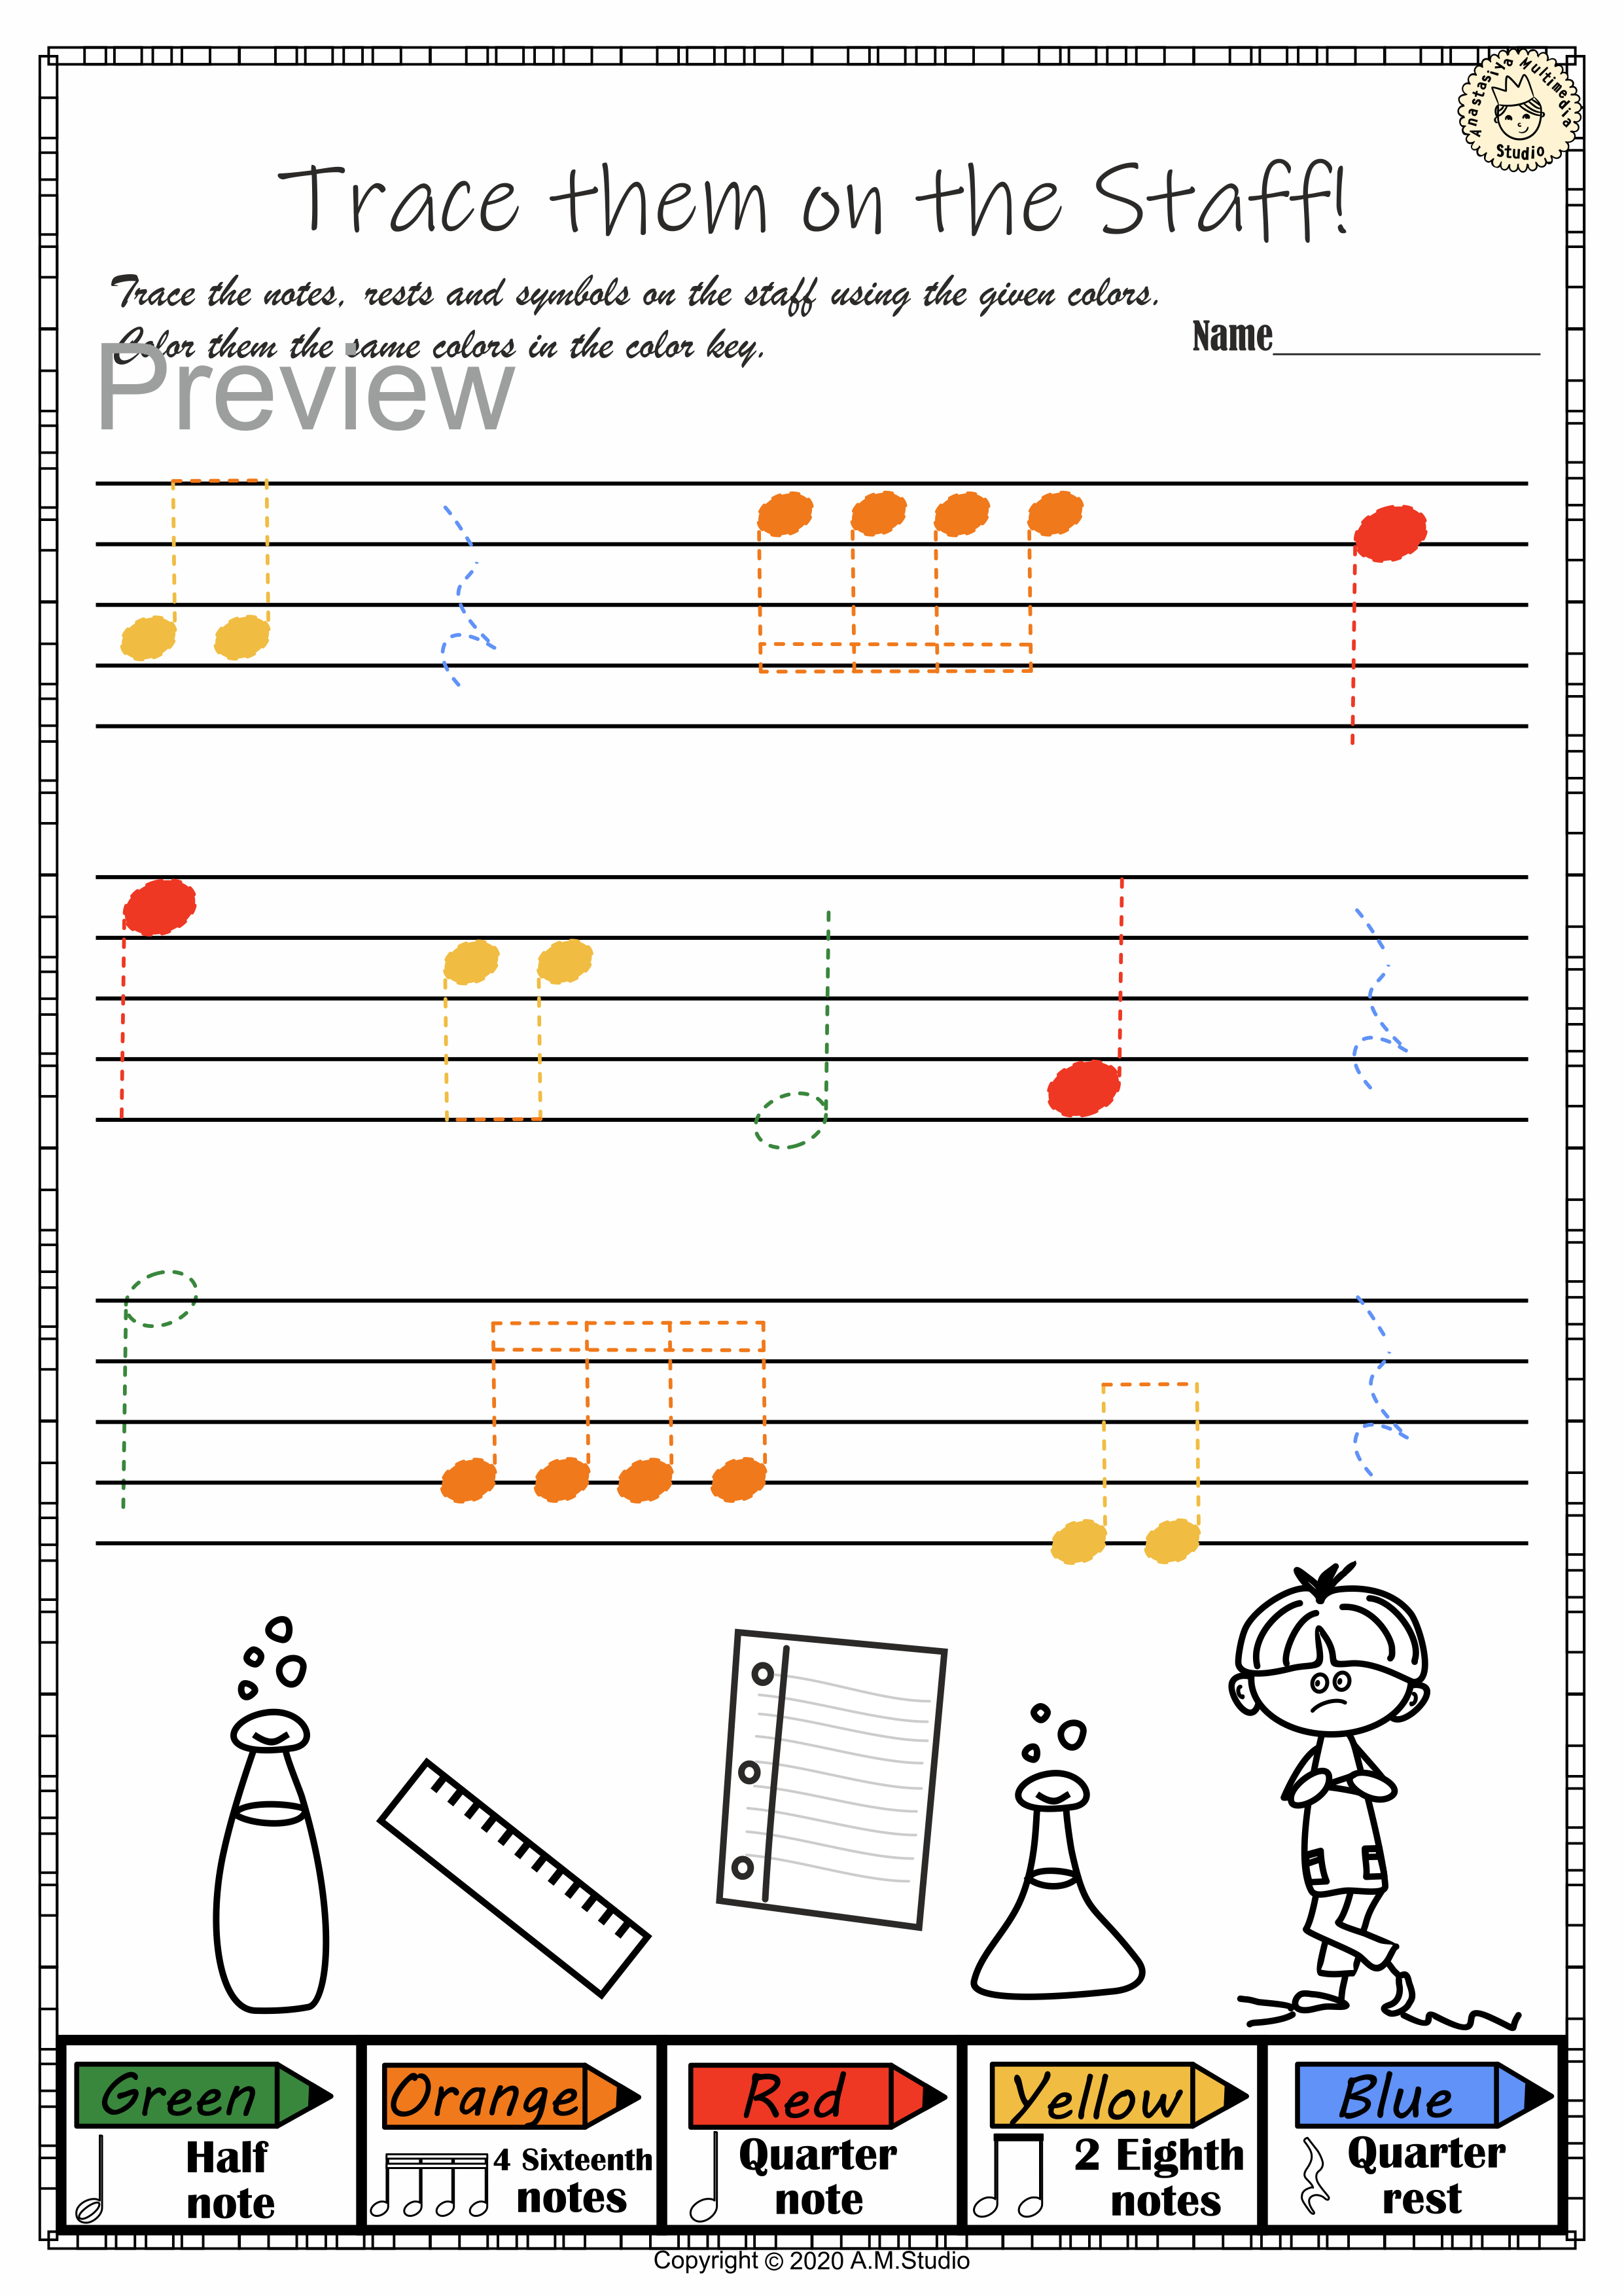 Back to School Trace and Color Music Pages #2 (img # 2)